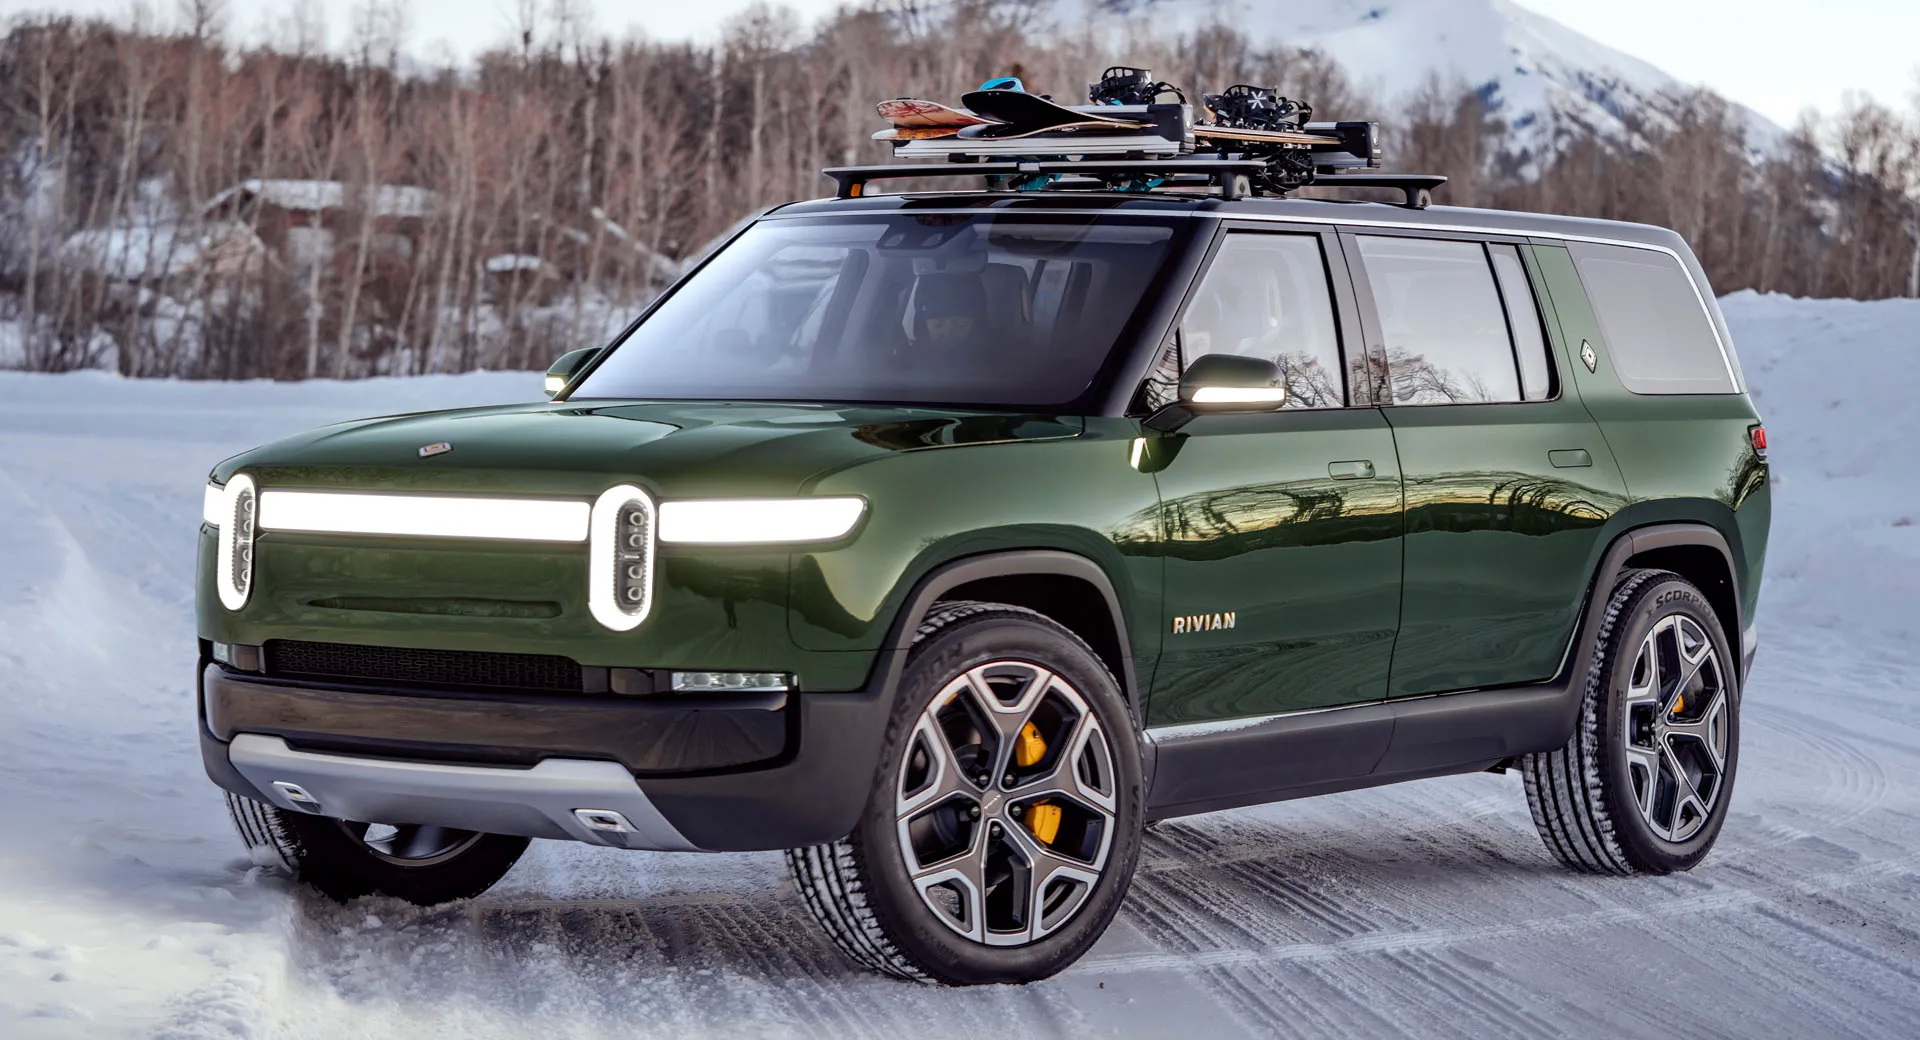 Rivian To Establish Charging Network Throughout The Wilderness Of The U.S.